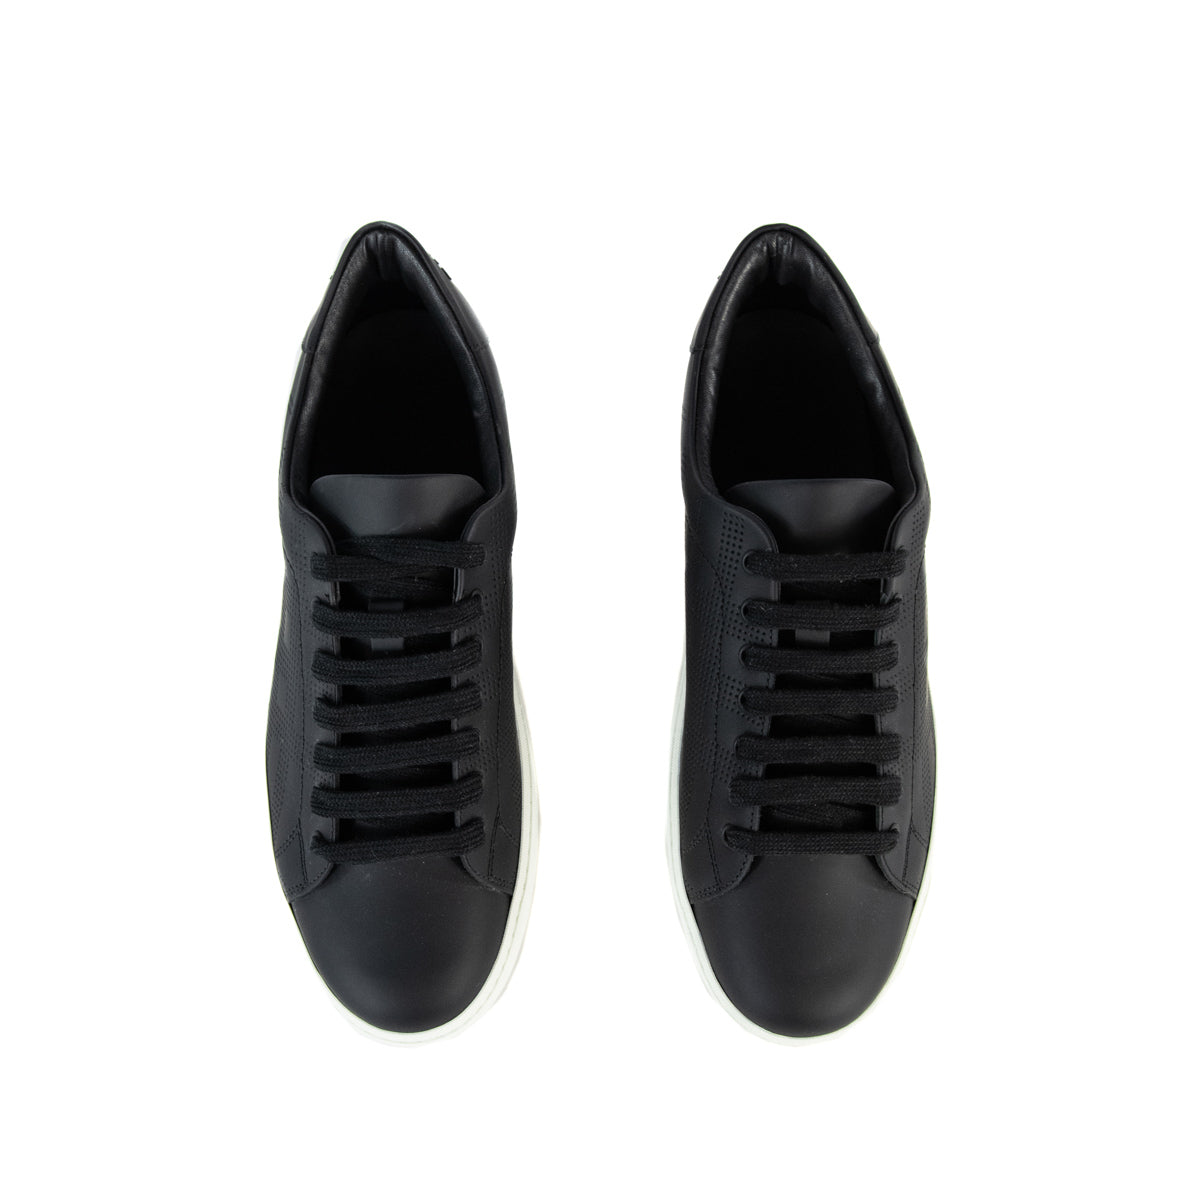 Burberry Black Sneakers Netherlands, SAVE 42% 